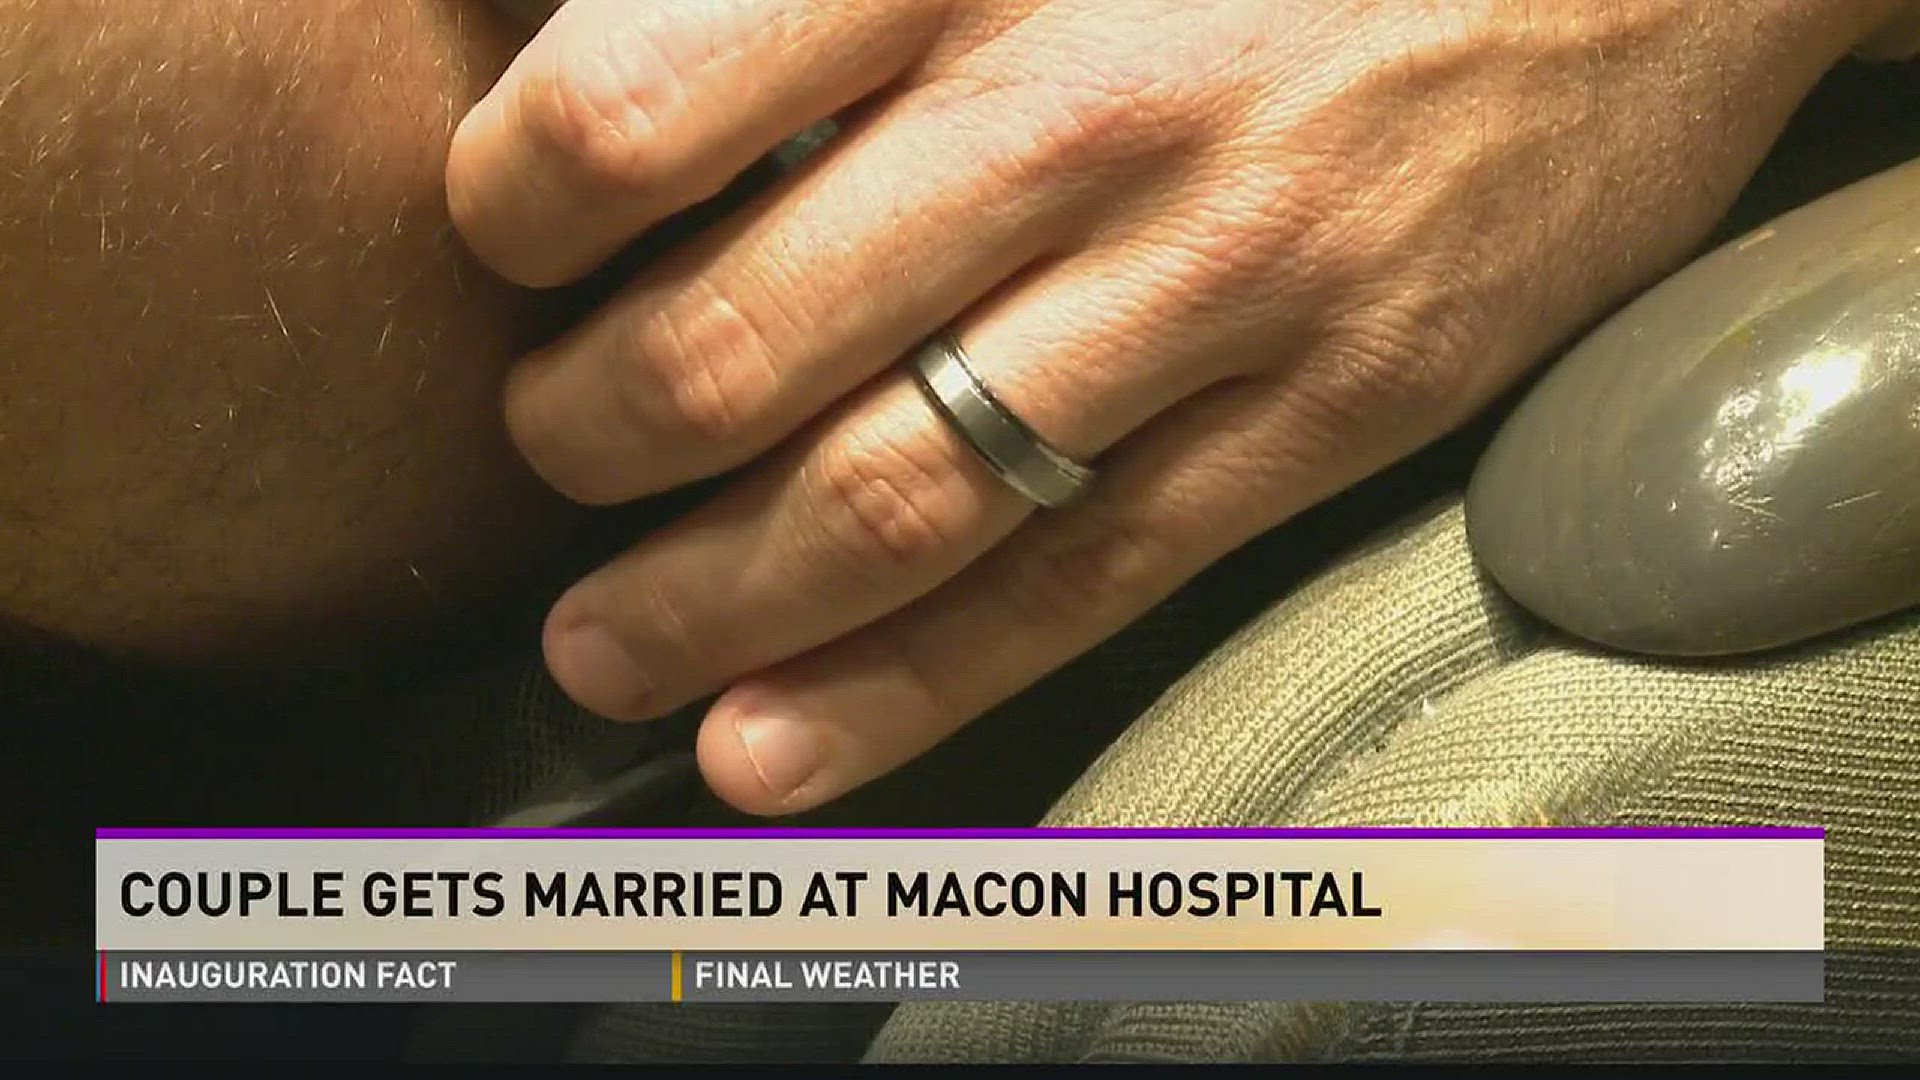 Couple gets married at Macon hospital